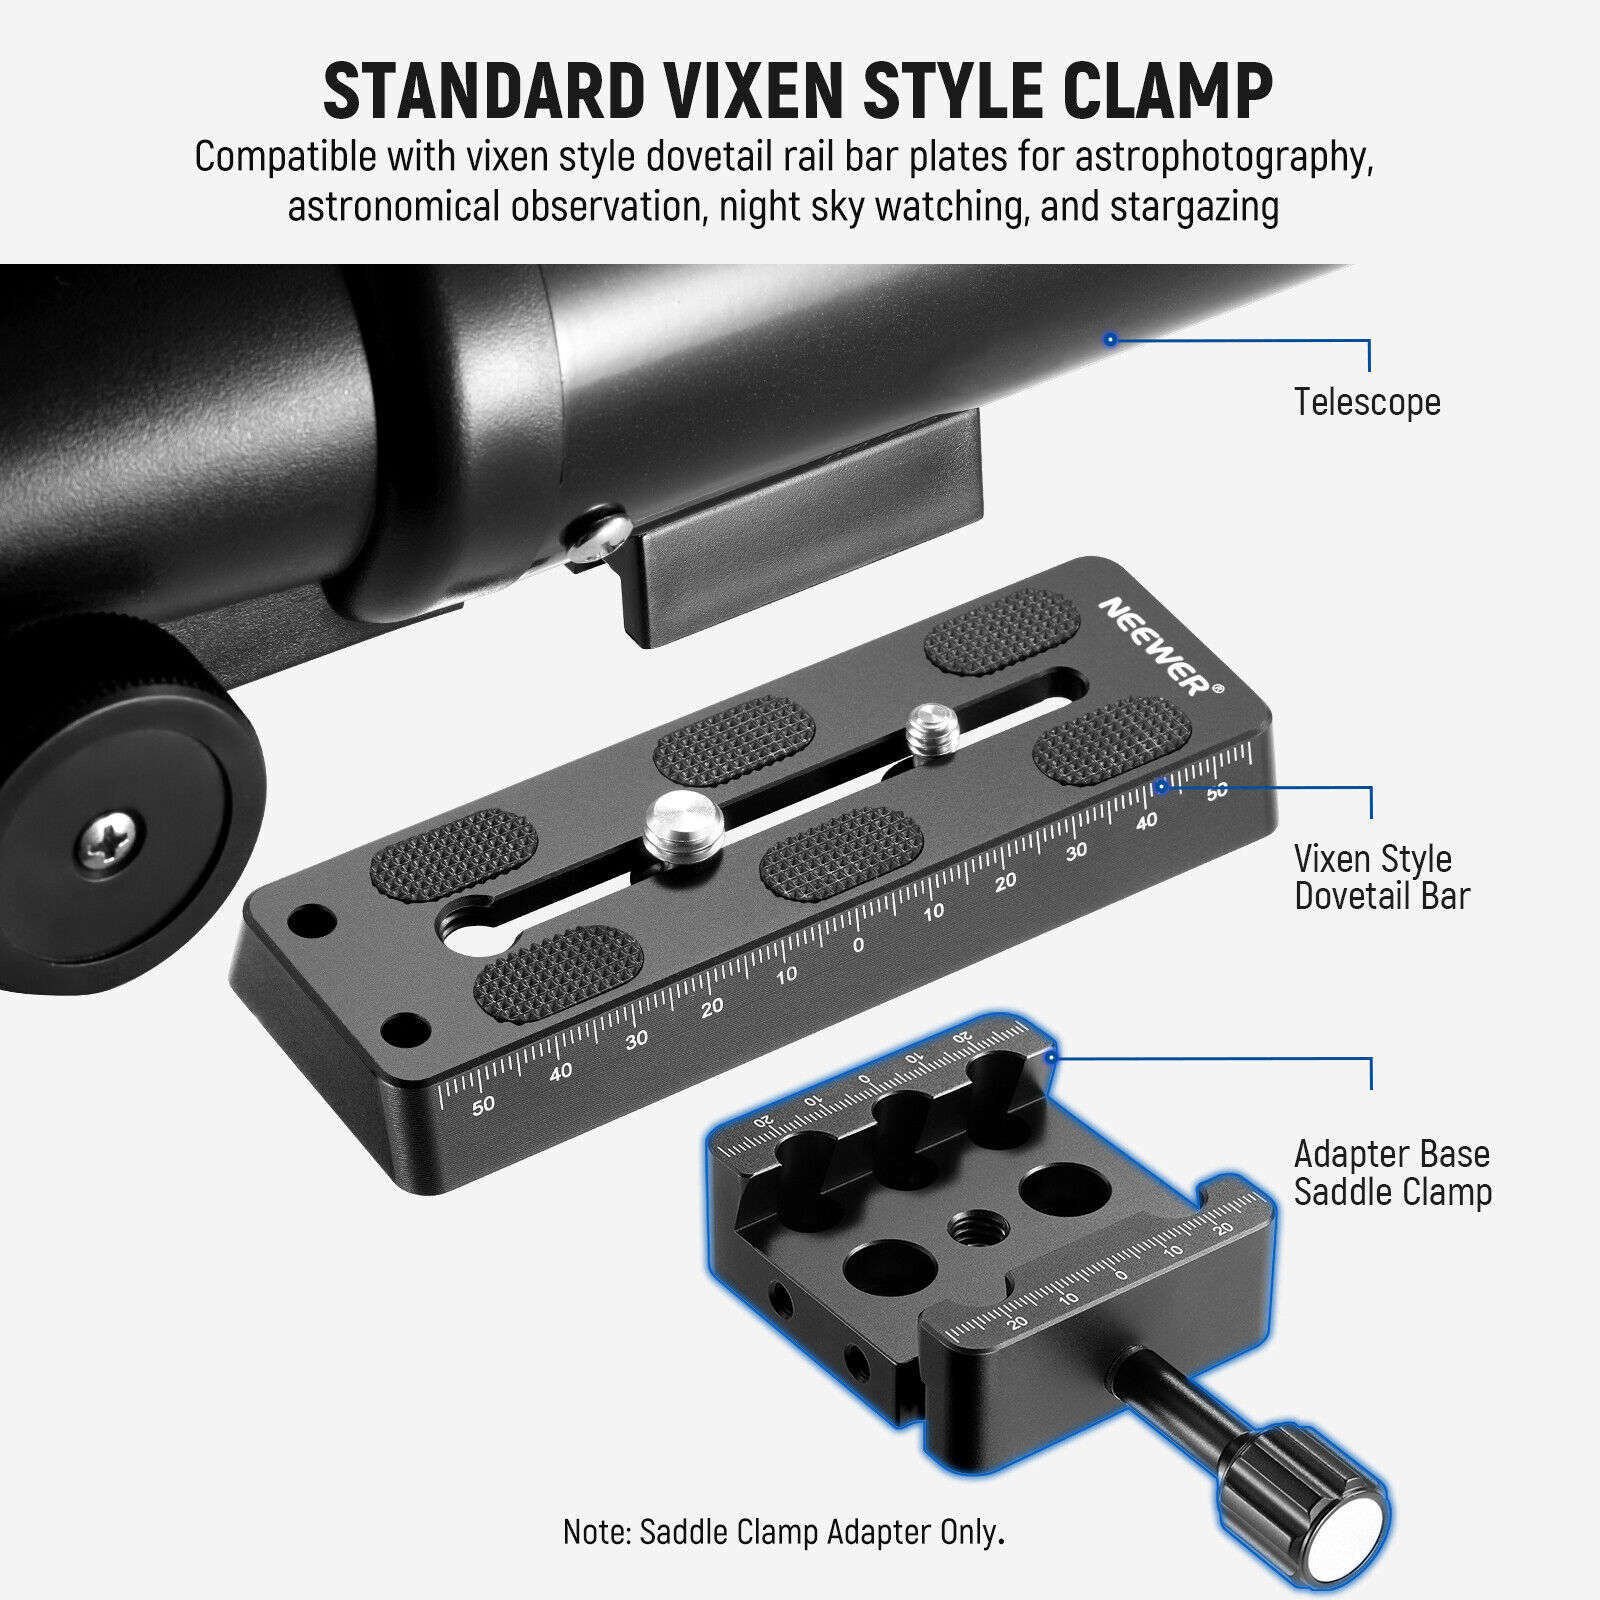 NEEWER Telescope Tripod Adapter Base Saddle Clamp for Vixen Style Dovetail Bars - $73.99